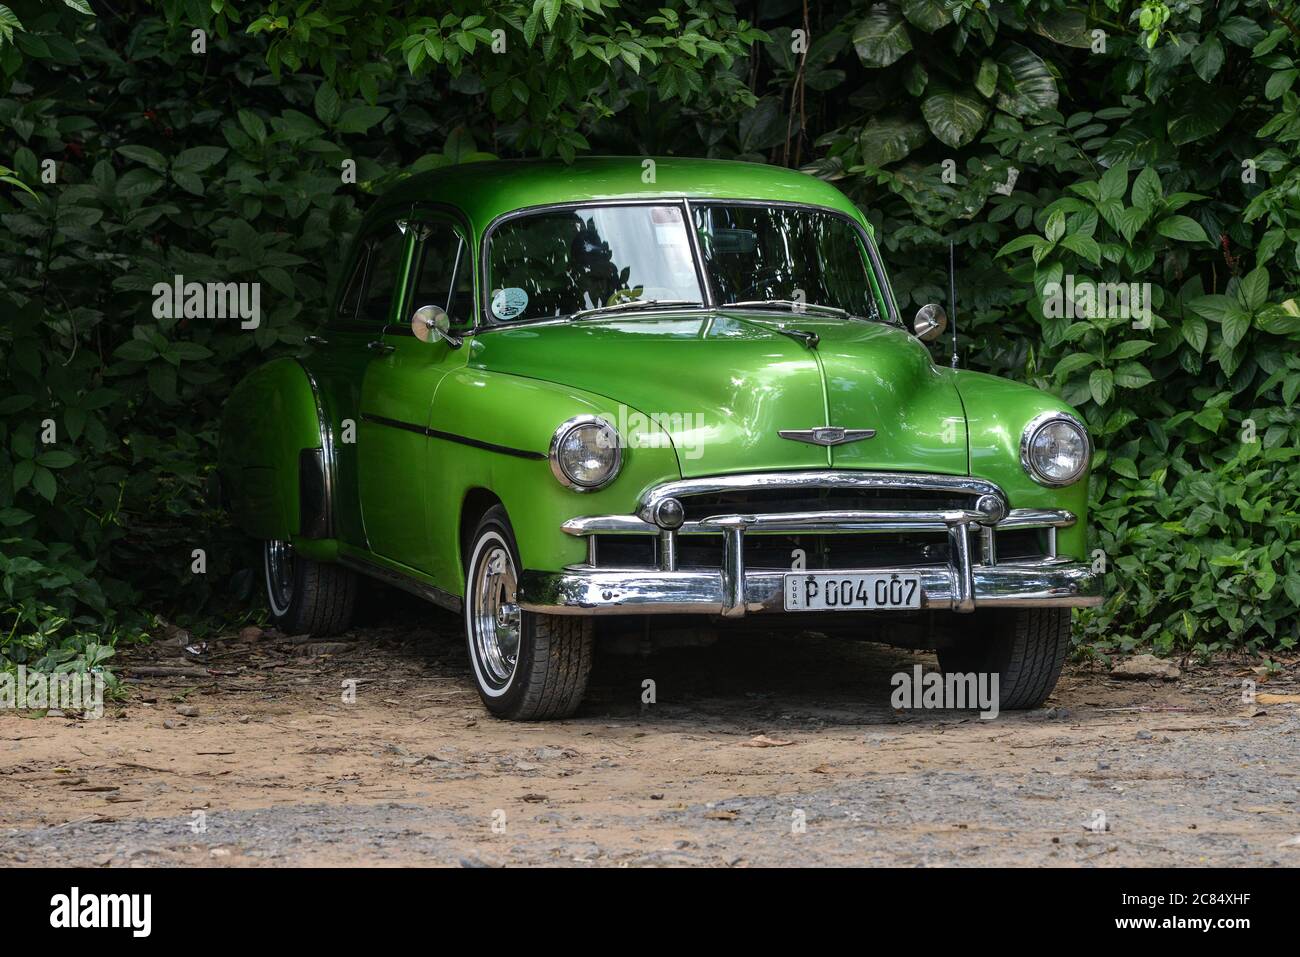 Cuba: classic American cars in the countryside. Gleaming apple-green 1951 Chevrolet parked in the middle of bushes Stock Photo